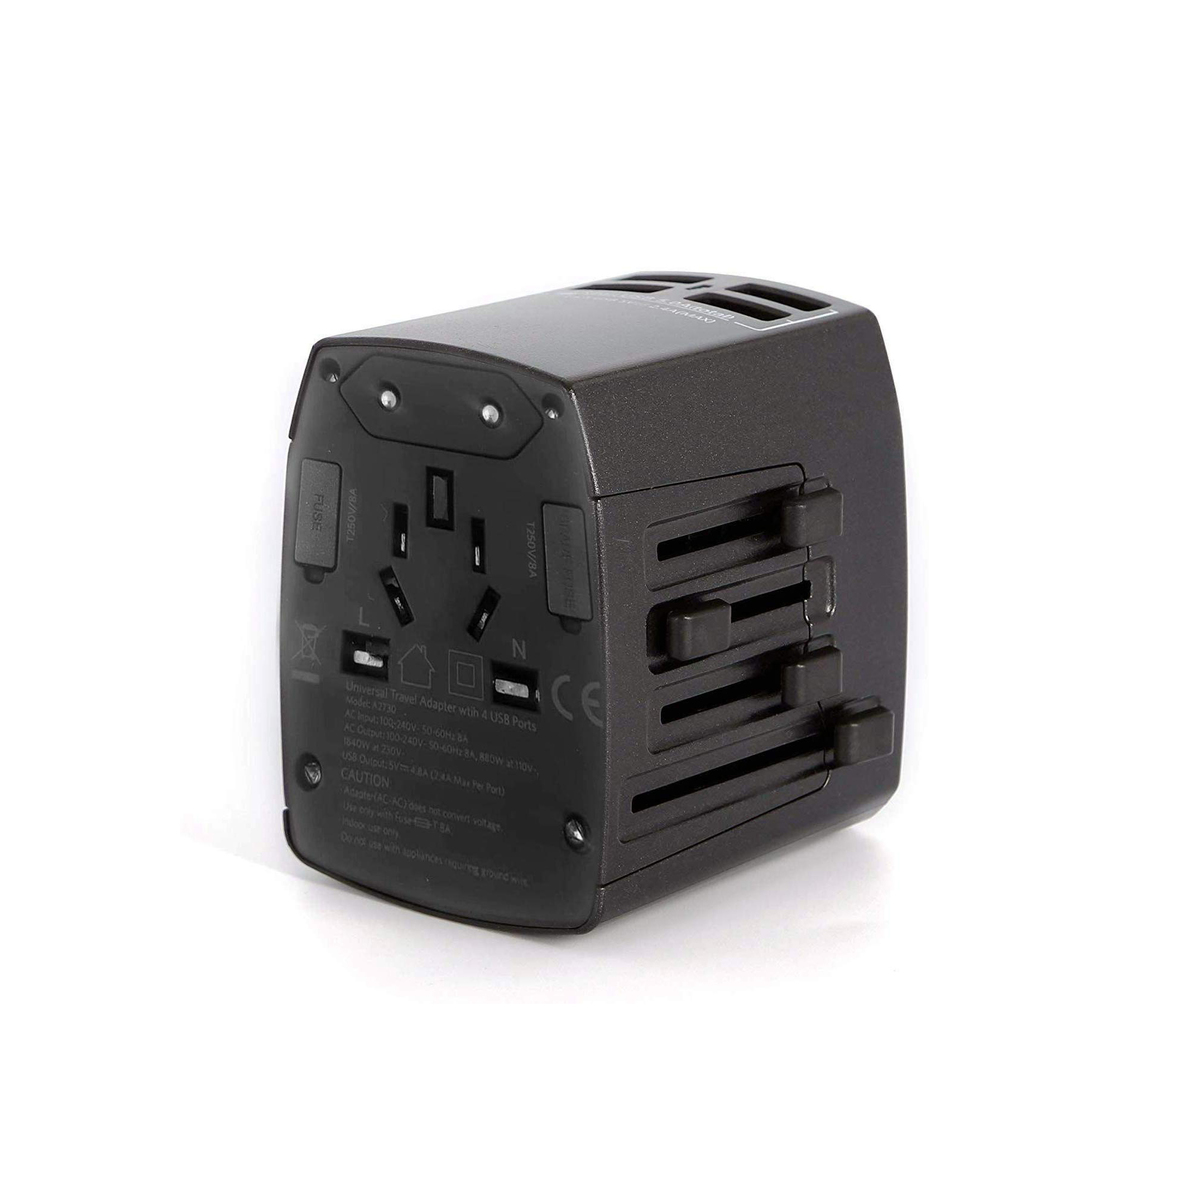 Anker Universal Travel Adapter with 4 USB Ports Black